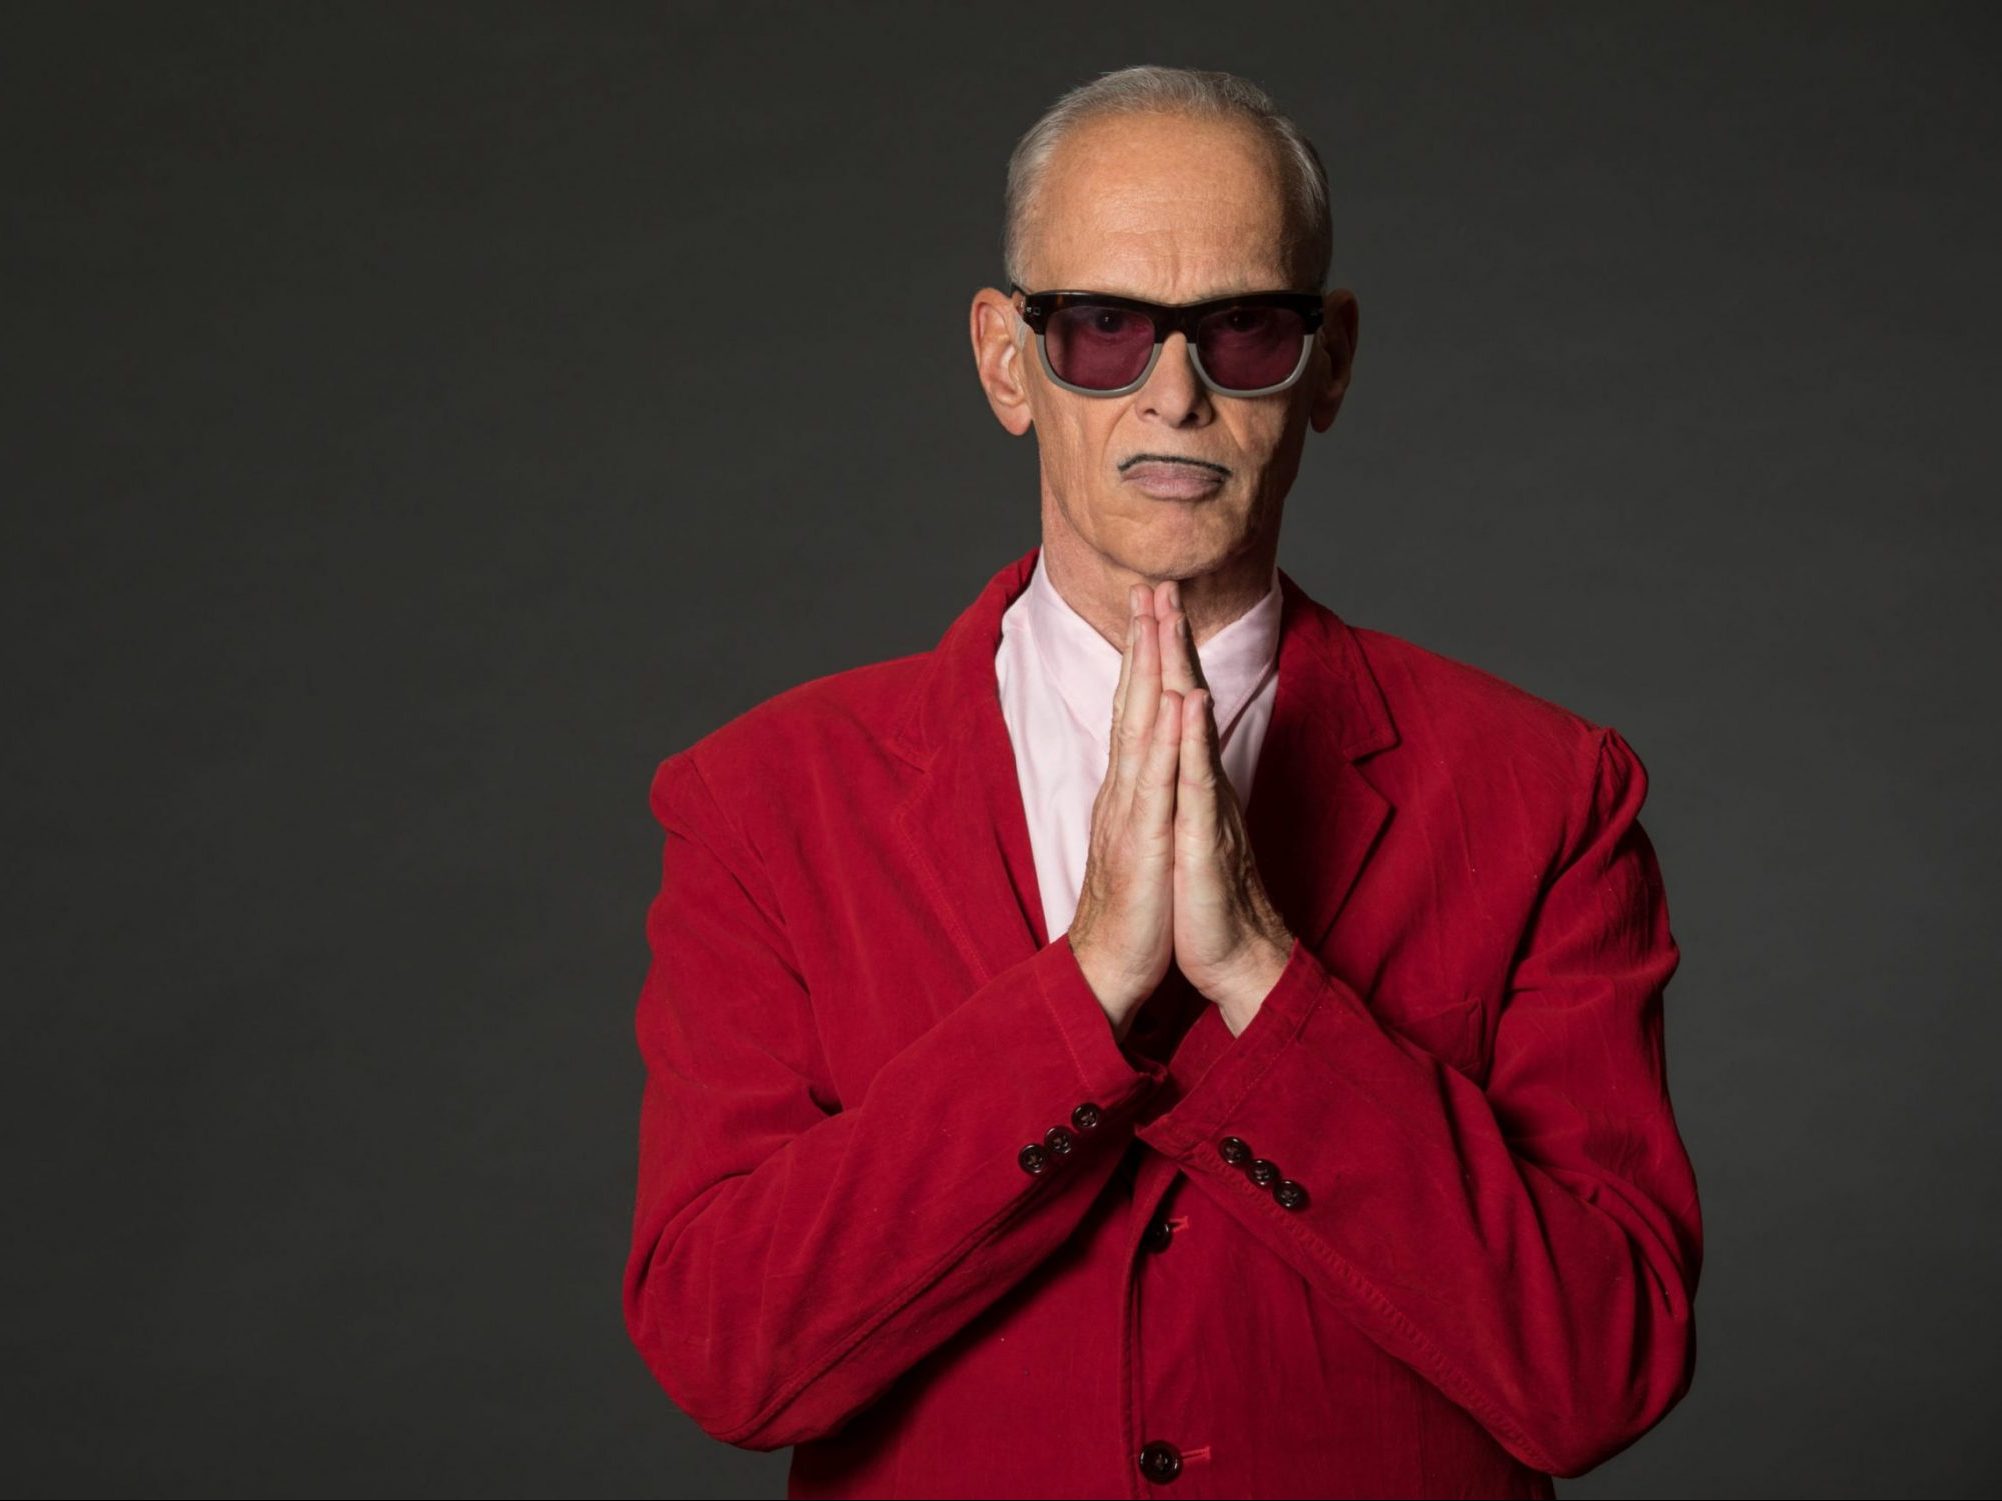 Pope of trash John Waters will return to directing with